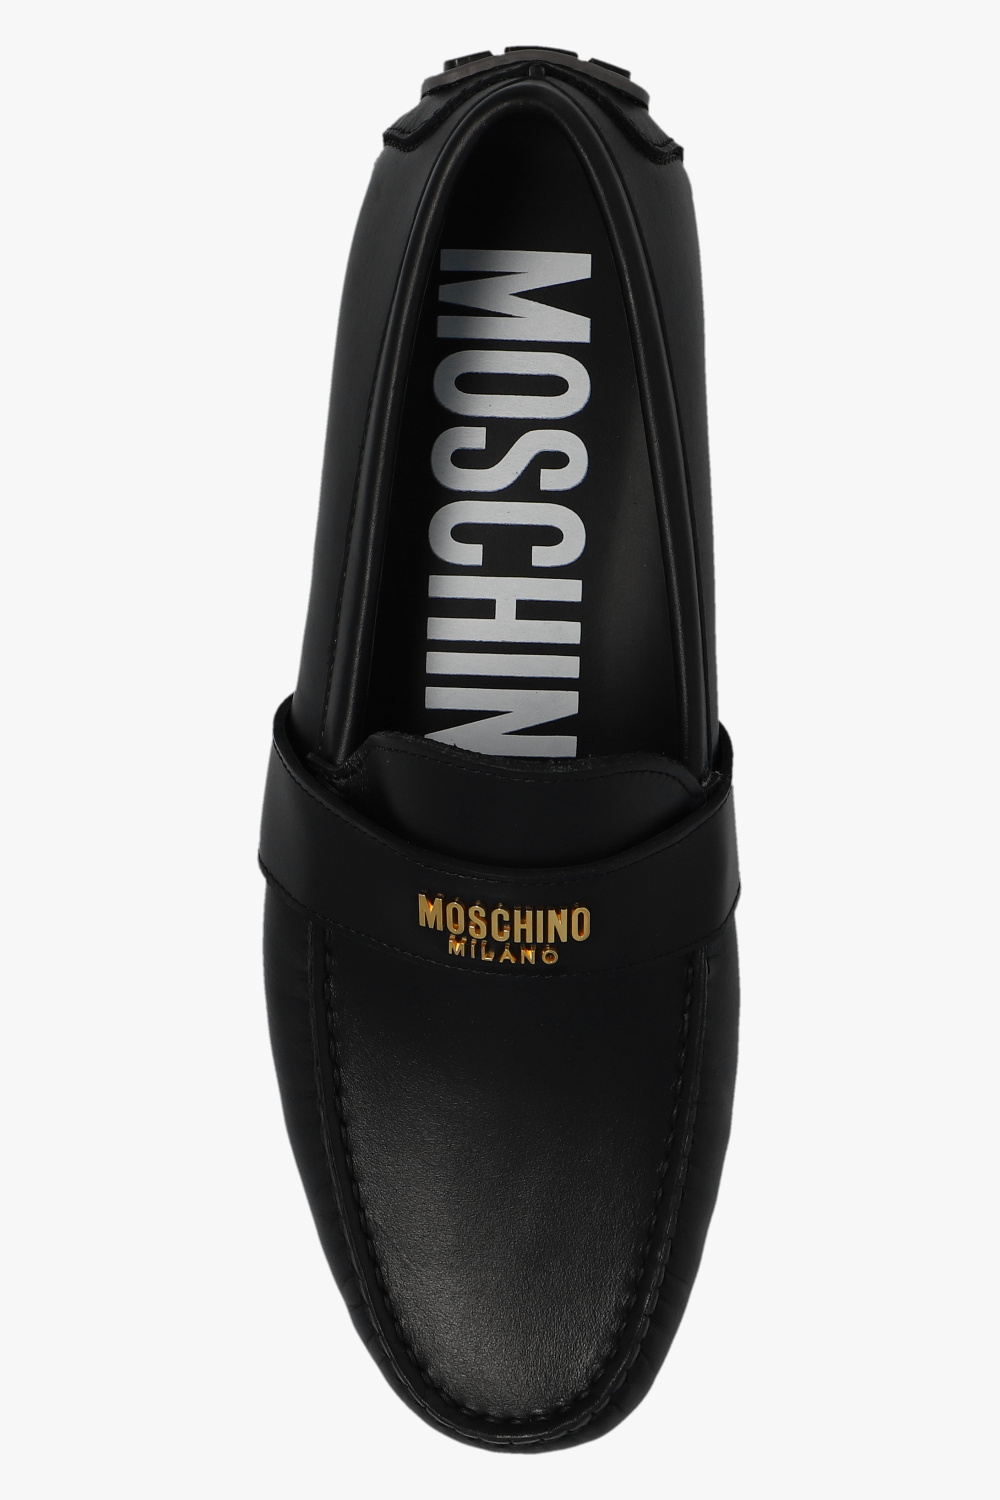 Moschino Start planning your perfect running excursion now